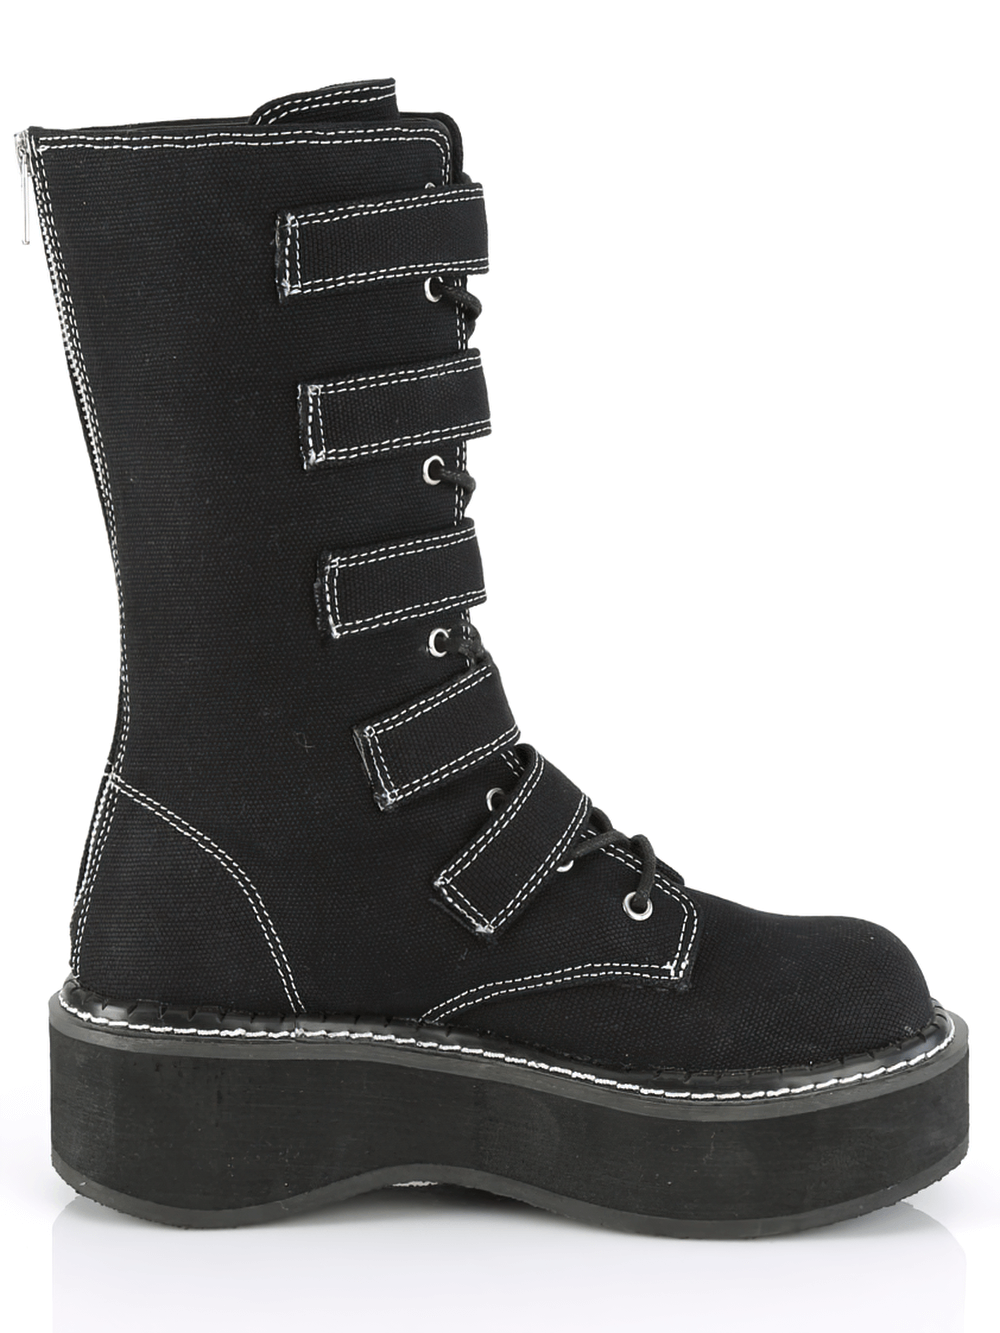 DEMONIA Buckle-Straps Mid-Calf Boots with Platform